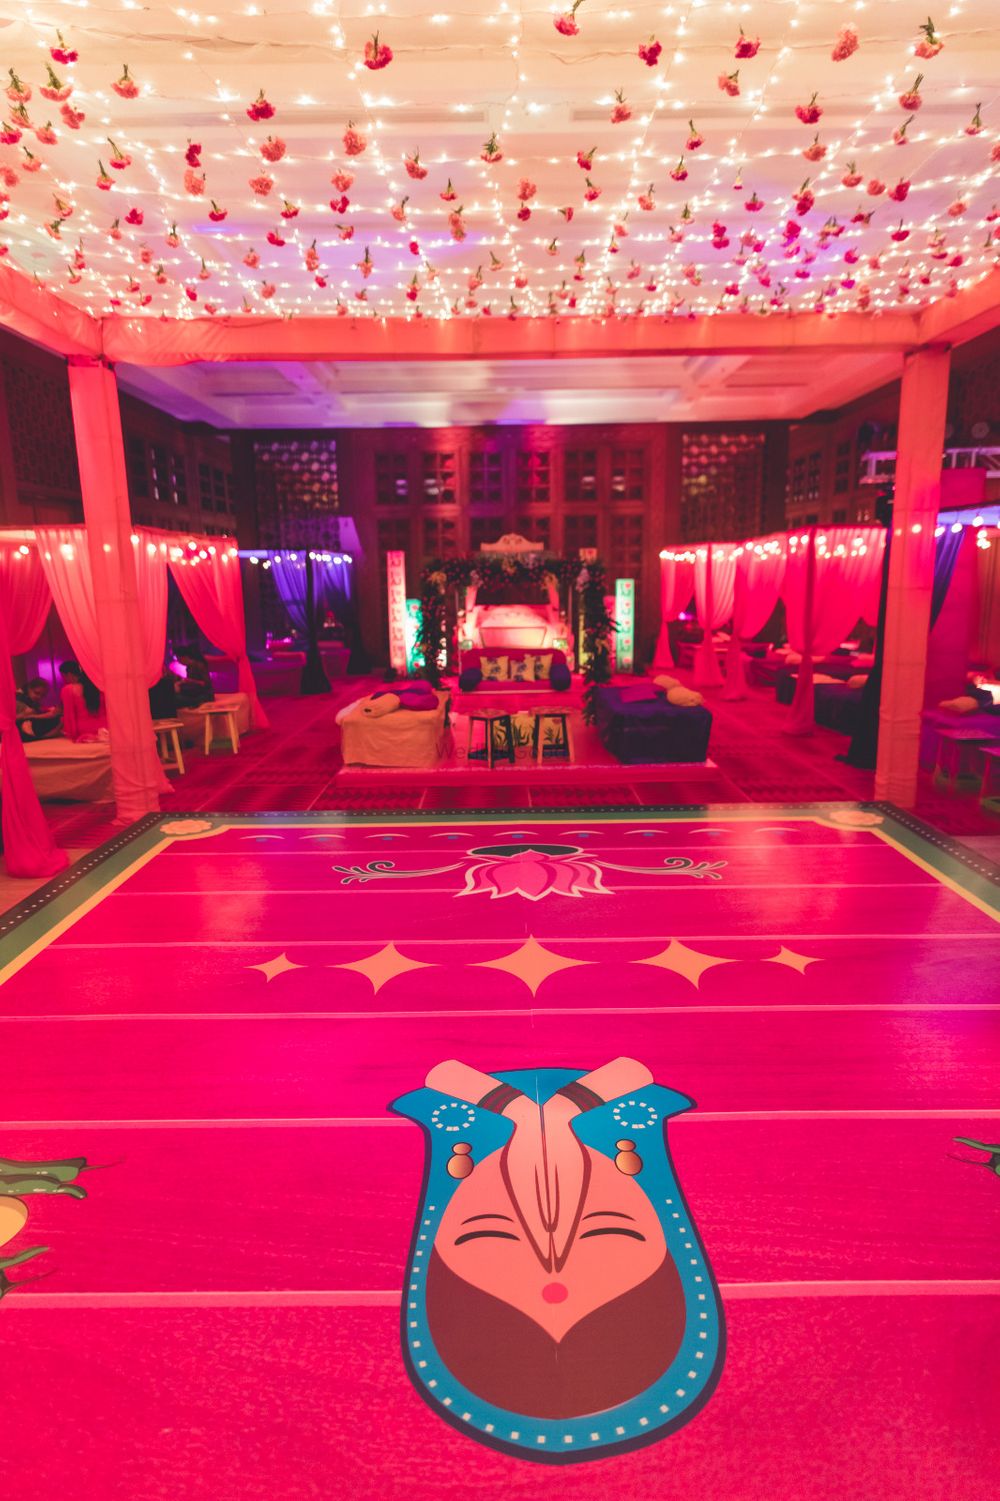 Photo of Bright pink dance floor with flowers and lights above